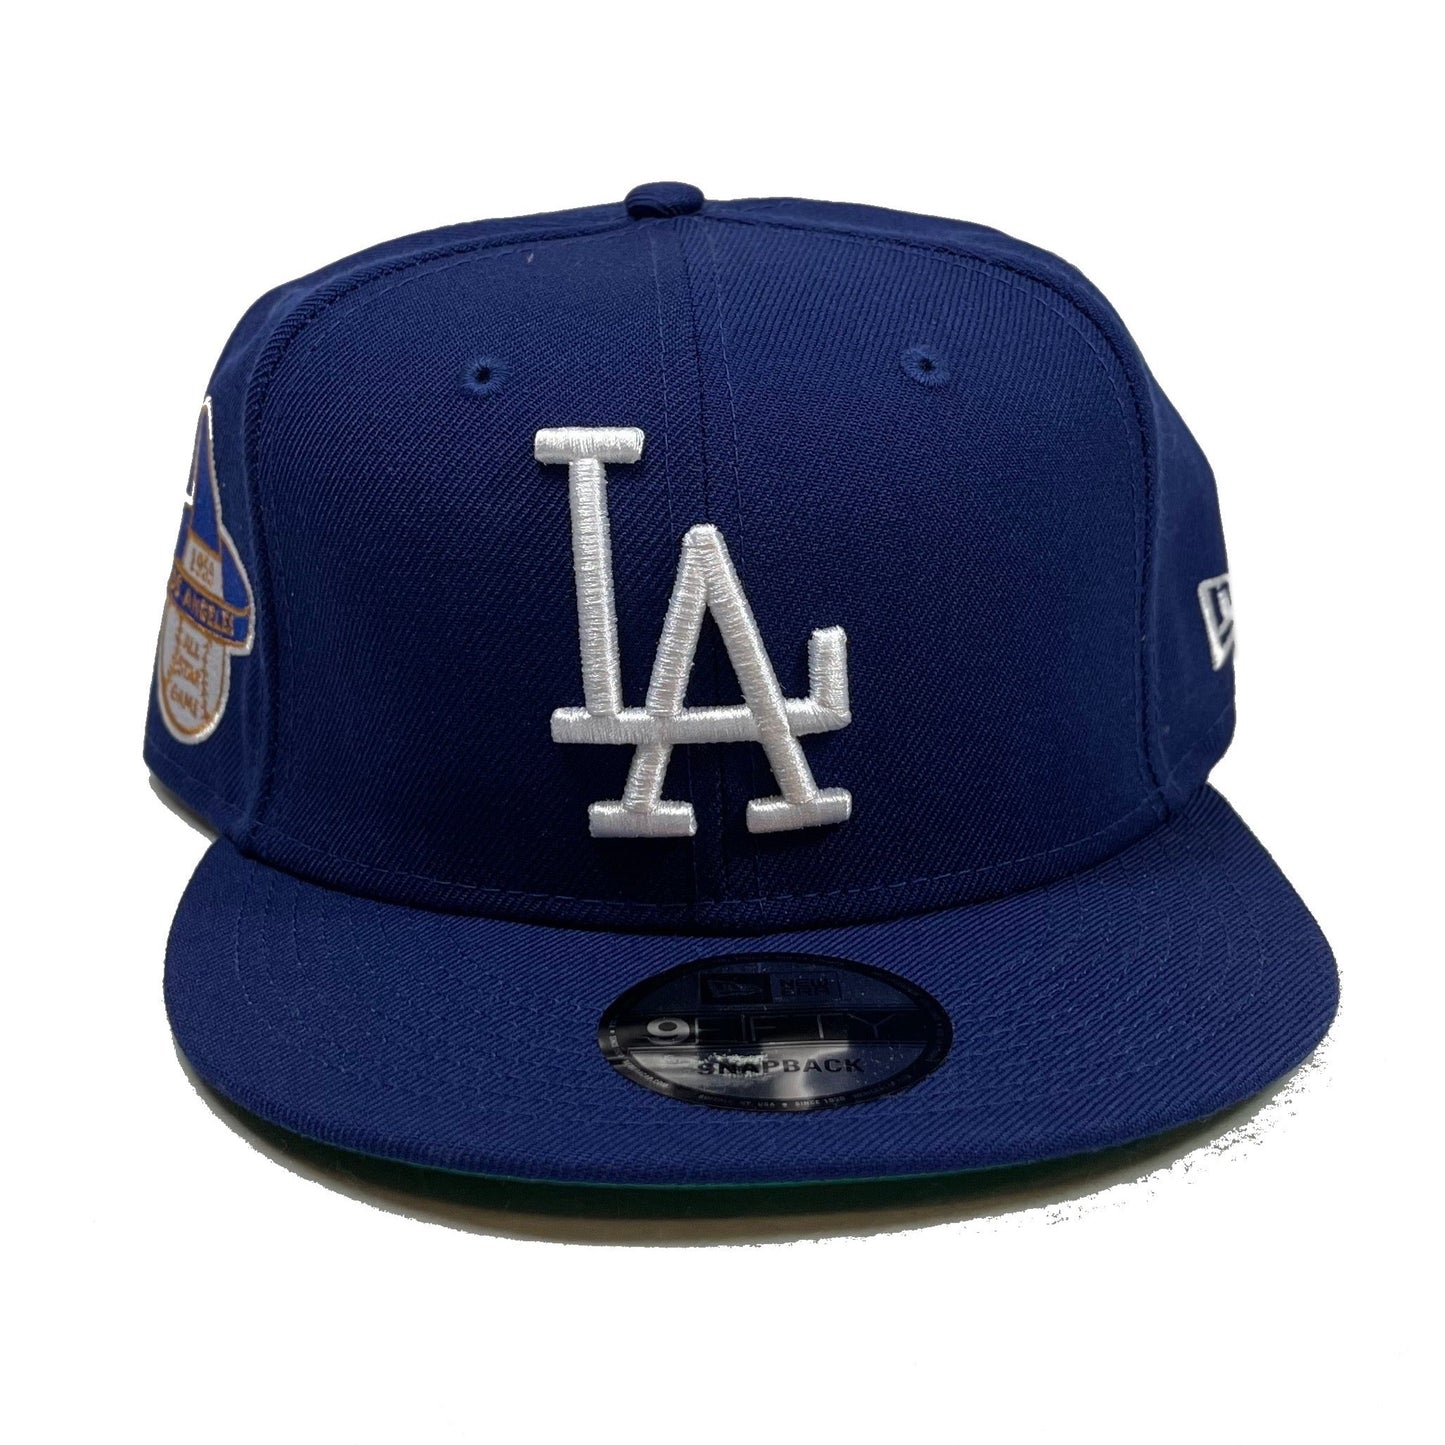 Los Angeles Dodgers All Star Game (Blue) Snapback